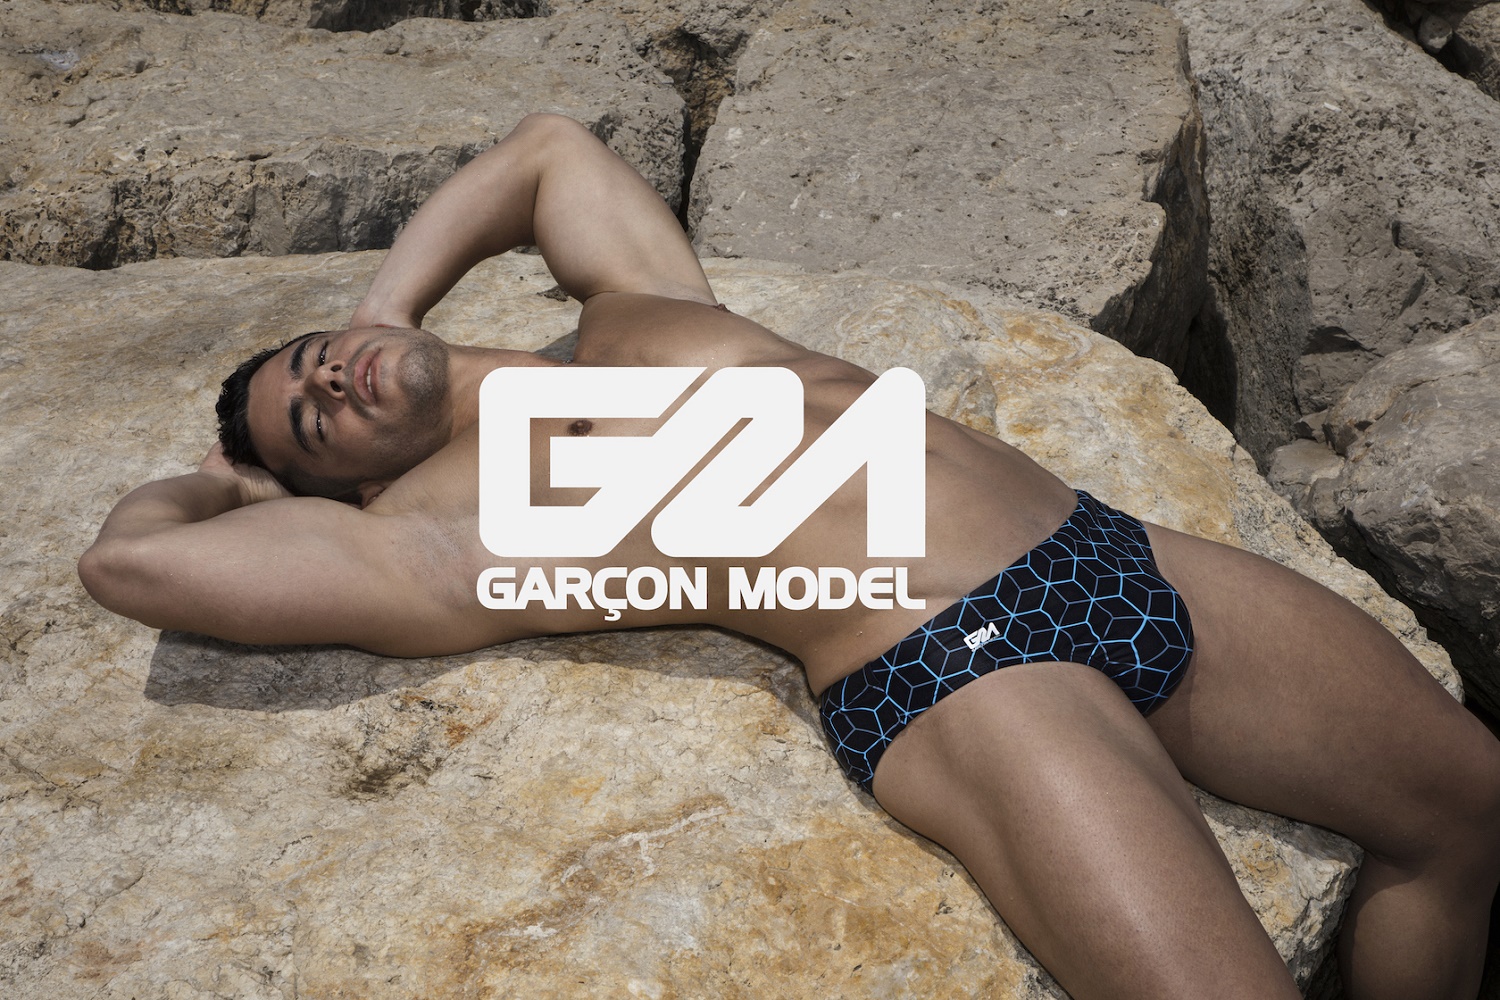 Garcon Model's latest campaign has left us sweating profusely